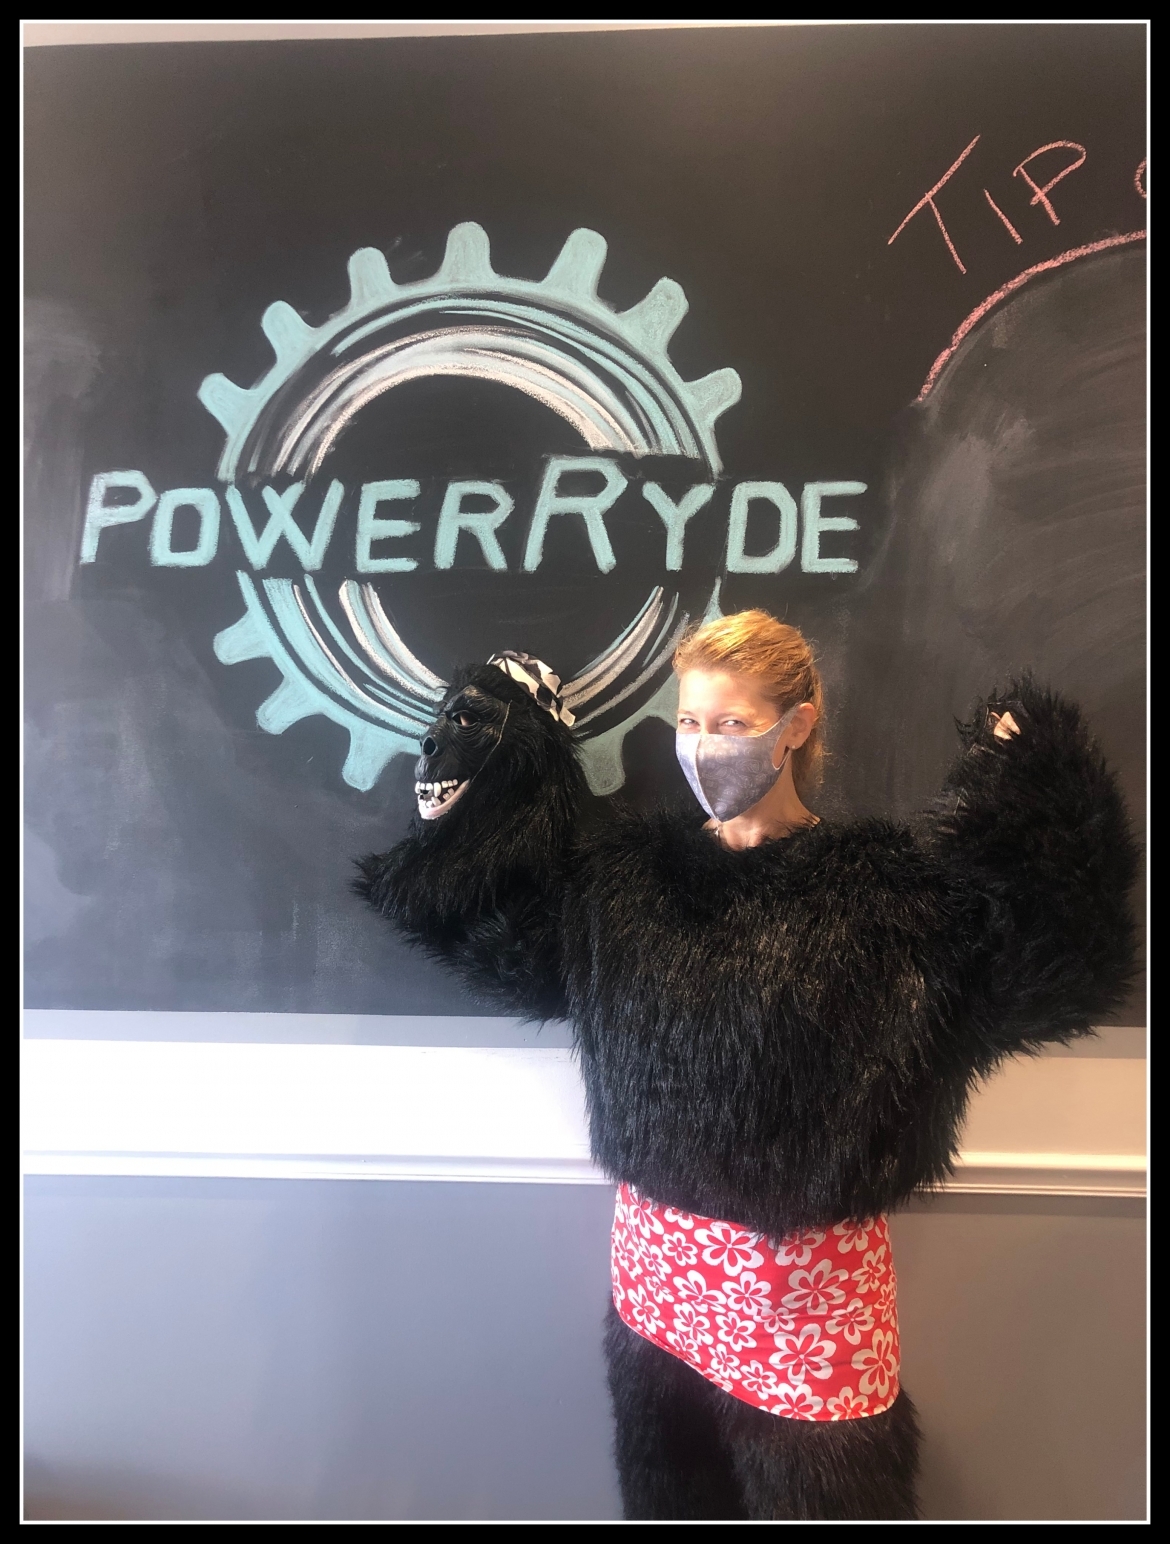 Tammy Brown with gorilla costume in front of chalk PowerRyde logo